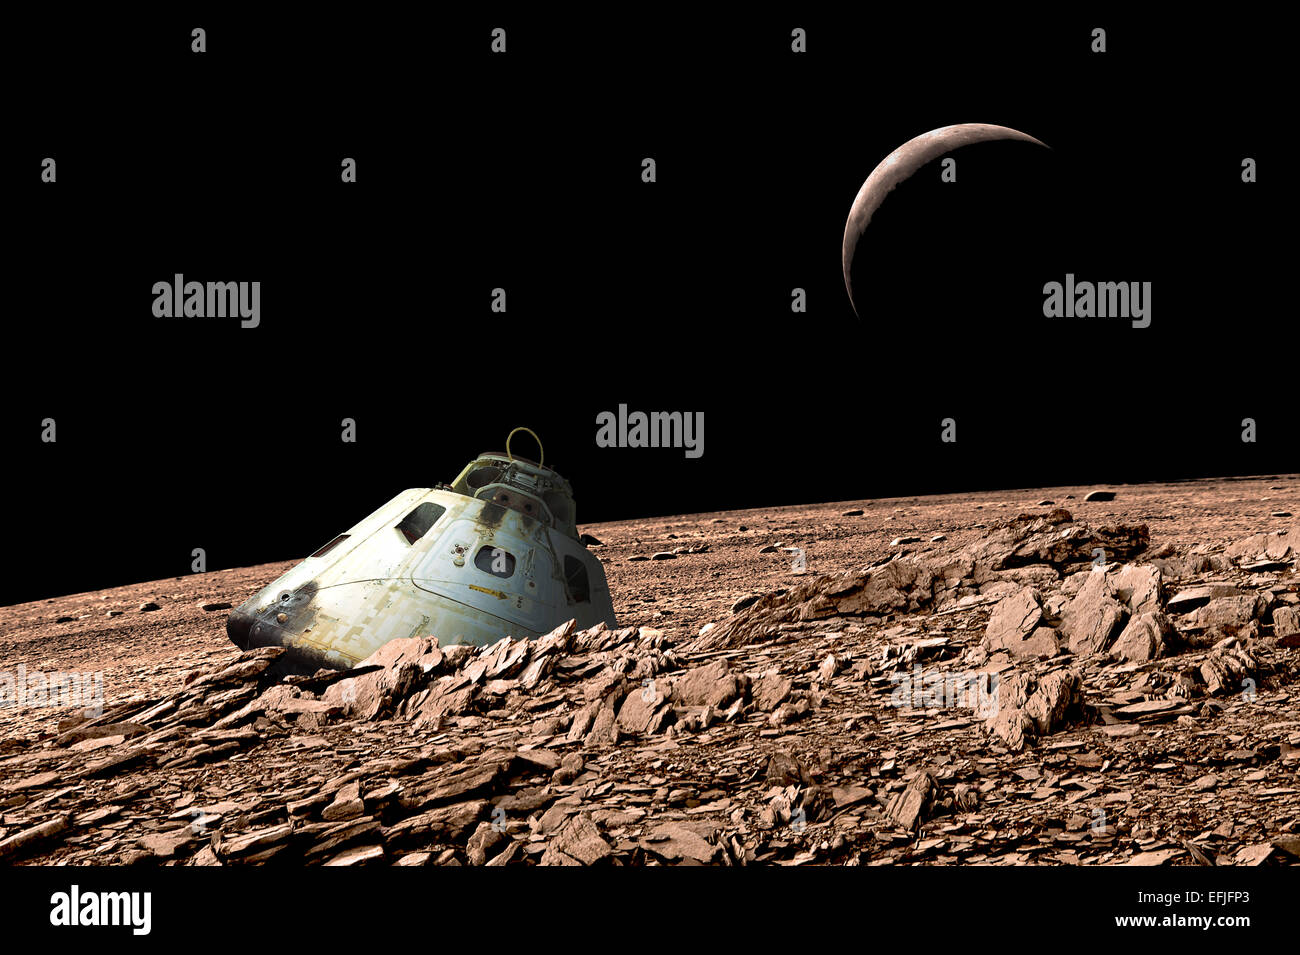 A scorched space capsule lies abandoned on a barren and airless moon. Stock Photo